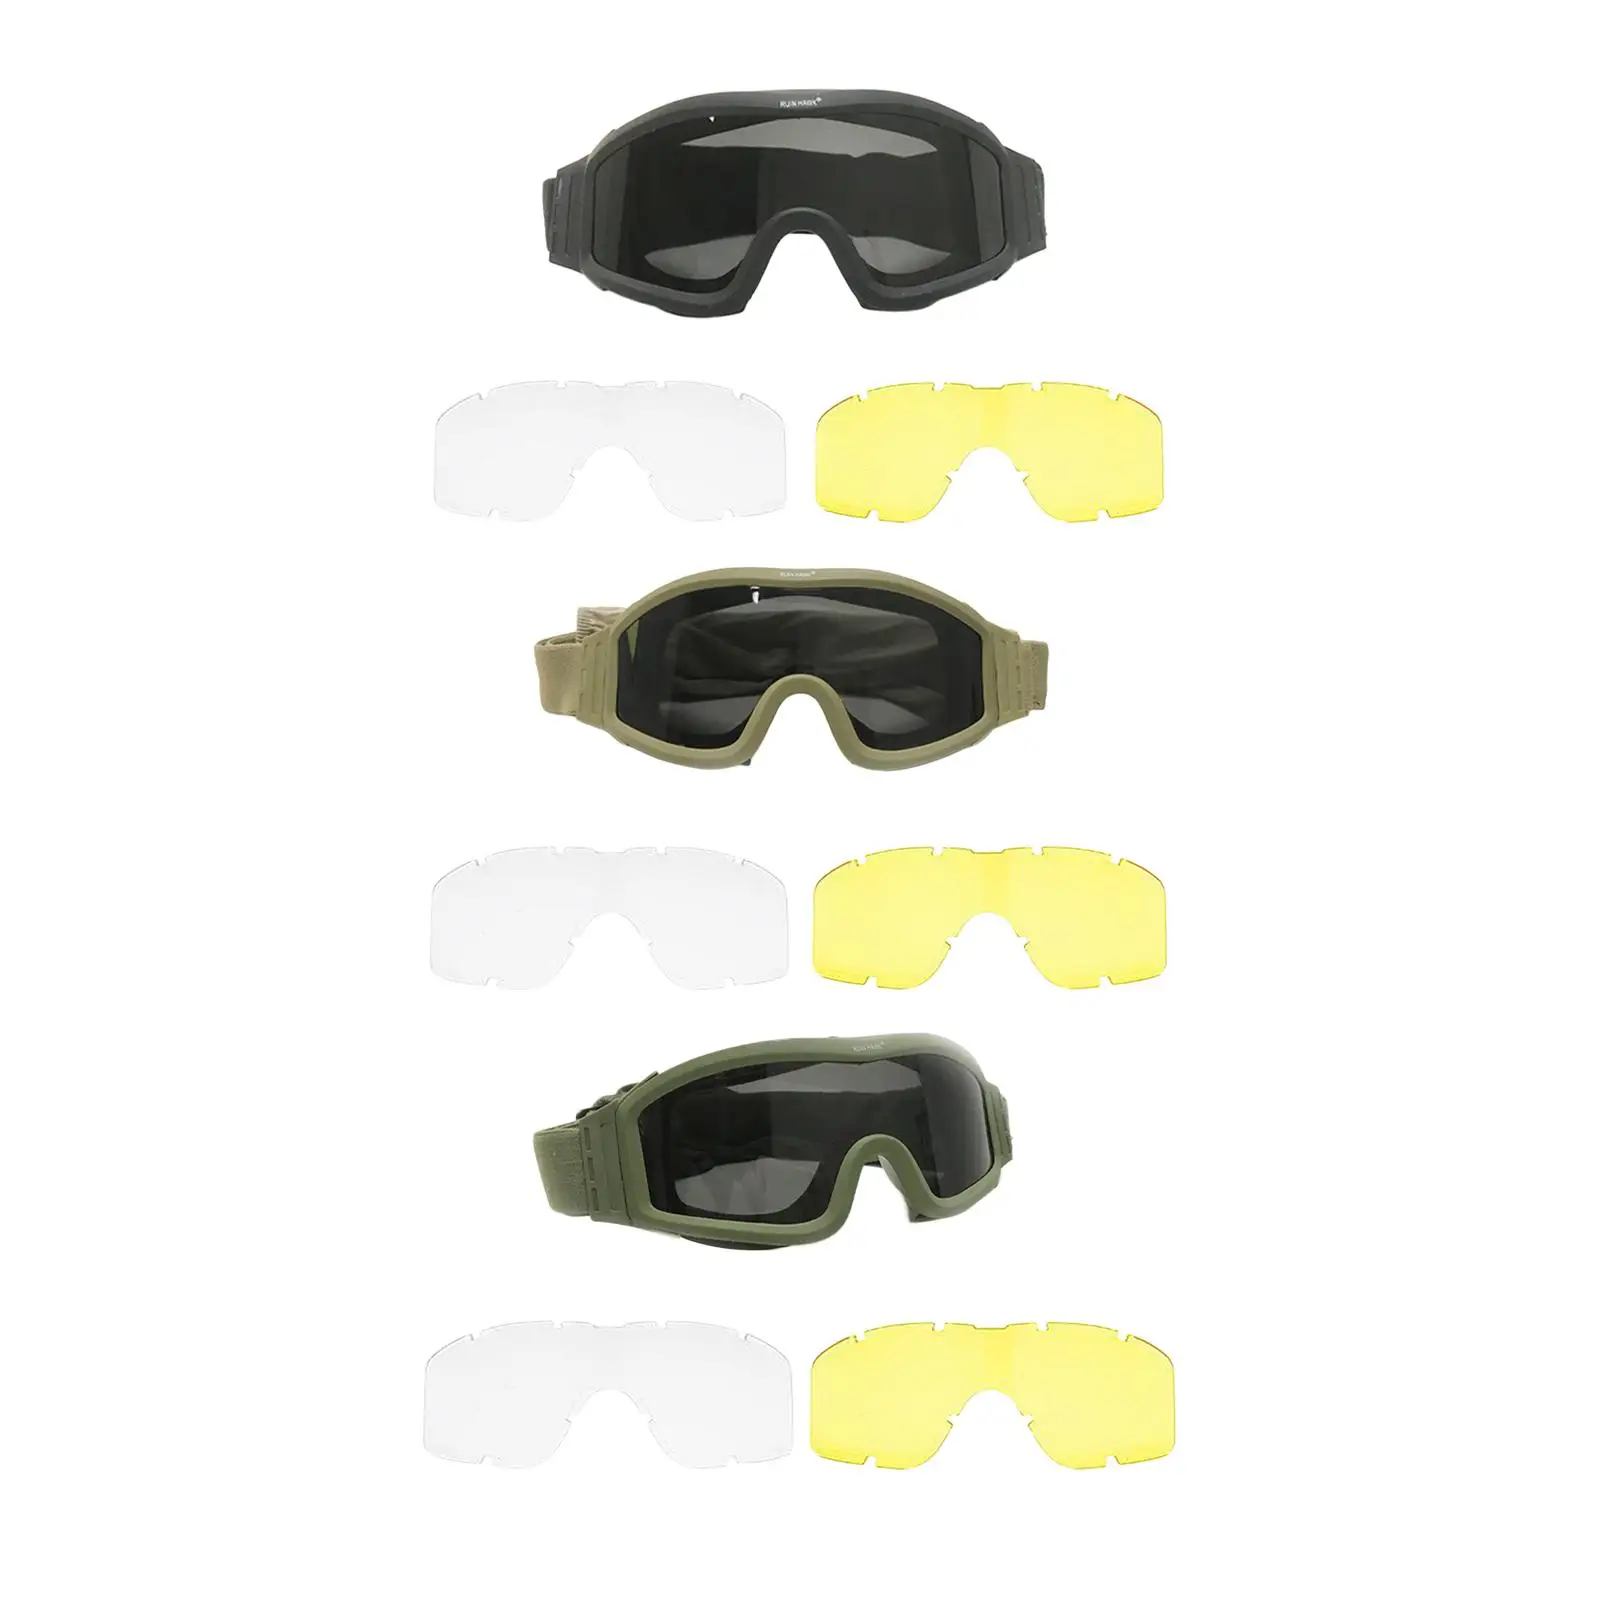 3 Lens Goggles Glasses Interchangeable Lens Protective  Outdoor Windproof for Desert Mountaineering Sport Riding 